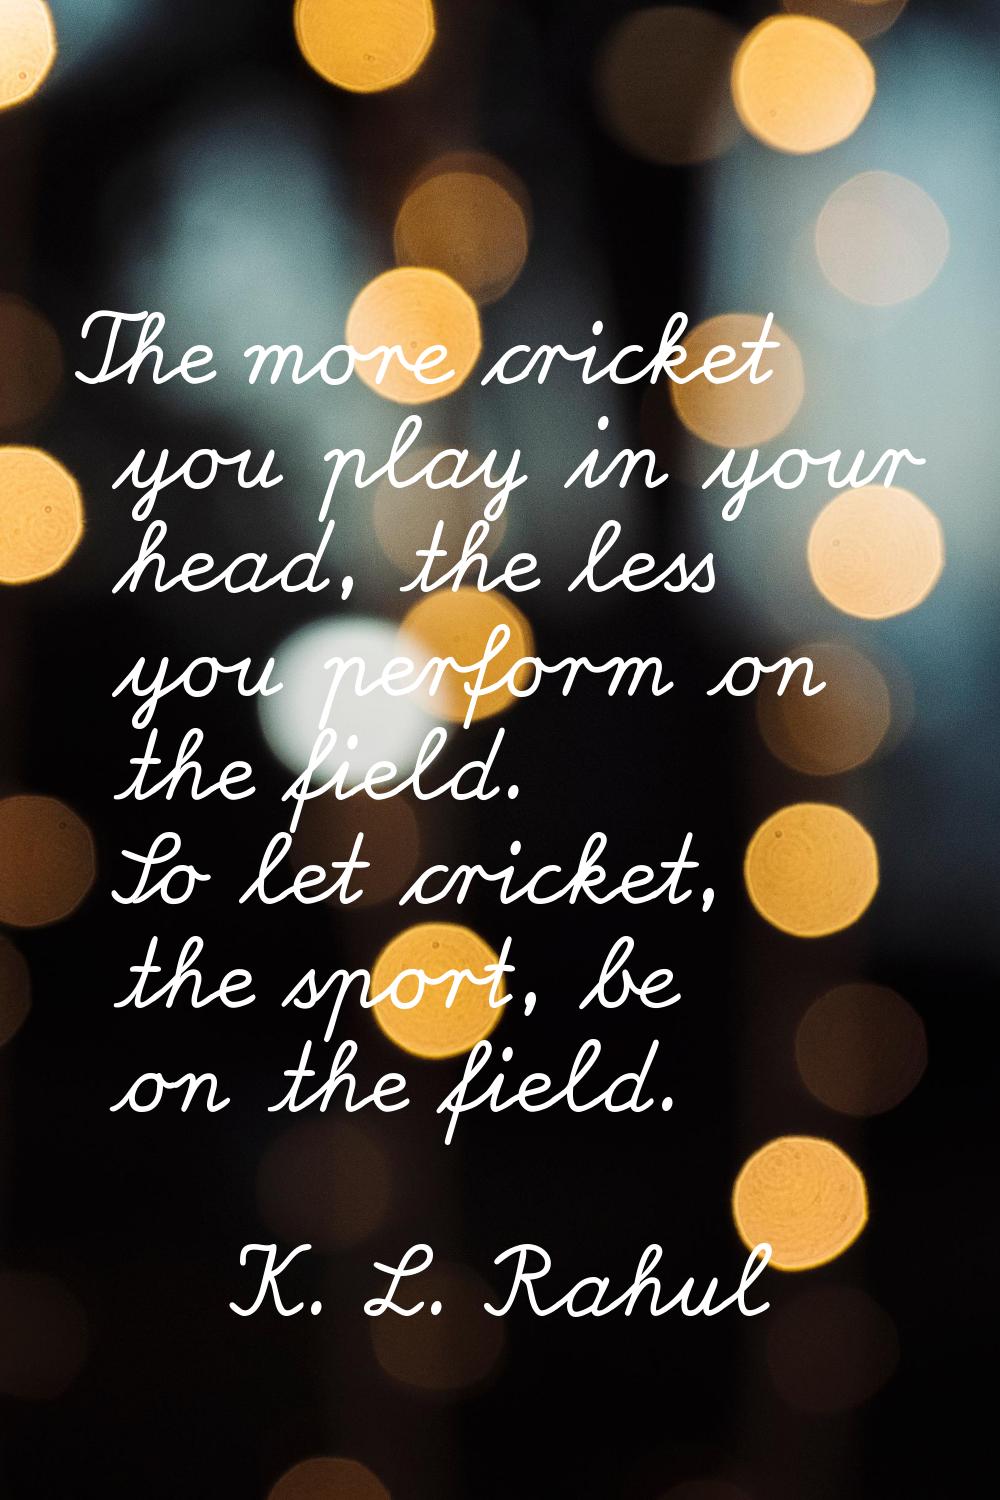 The more cricket you play in your head, the less you perform on the field. So let cricket, the spor